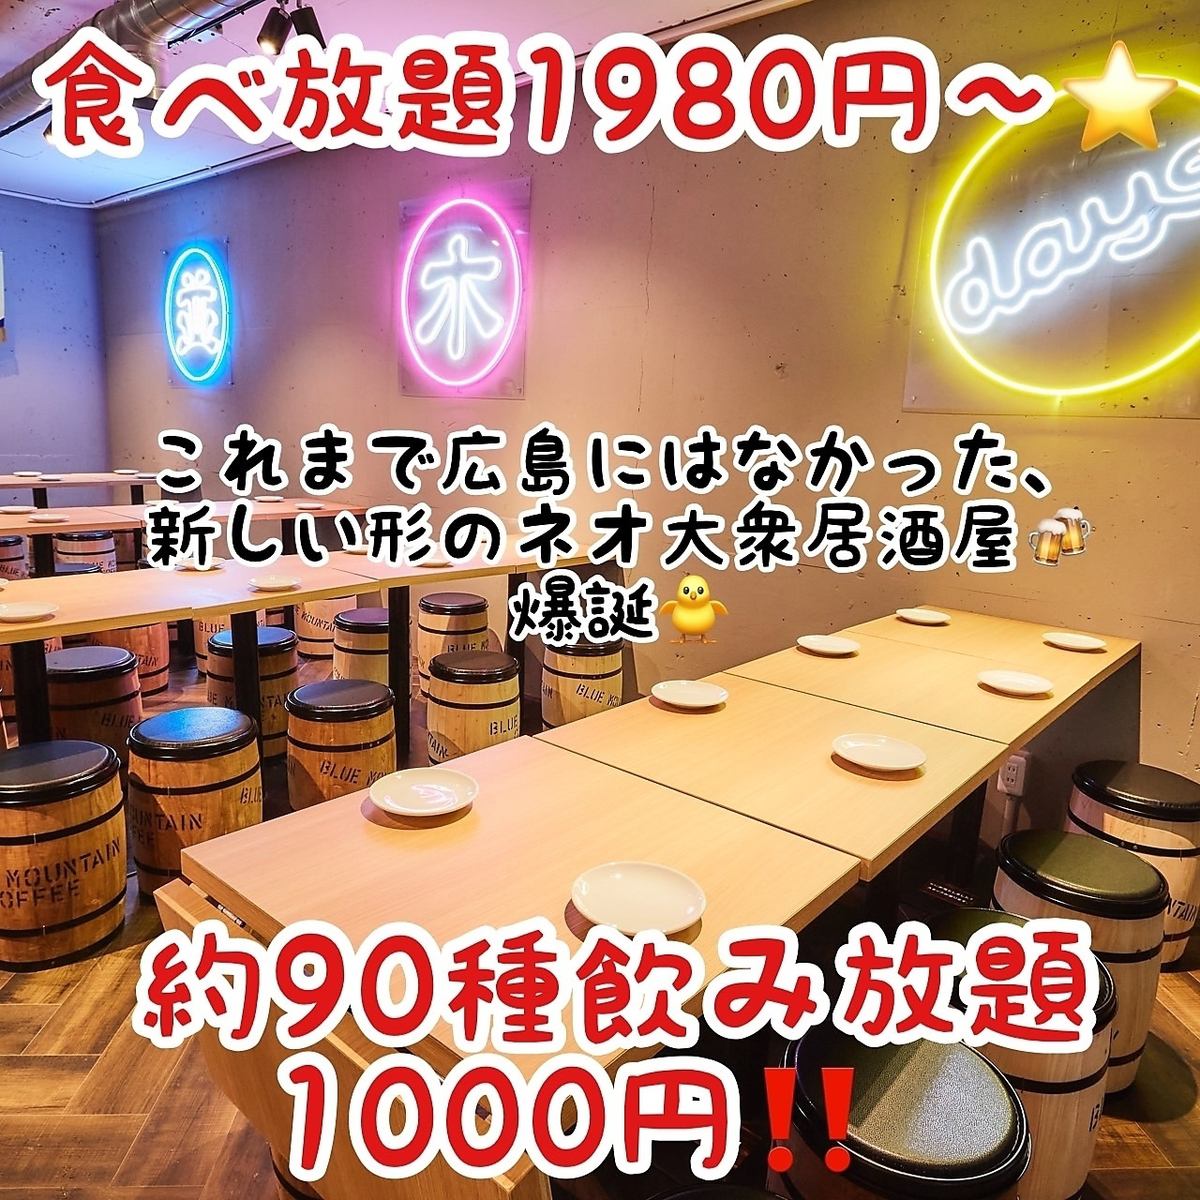 NEWOPEN on February 1, 2024 ♪ All-you-can-eat 1,980 yen, all-you-can-drink 1,000 yen, overwhelming cost performance